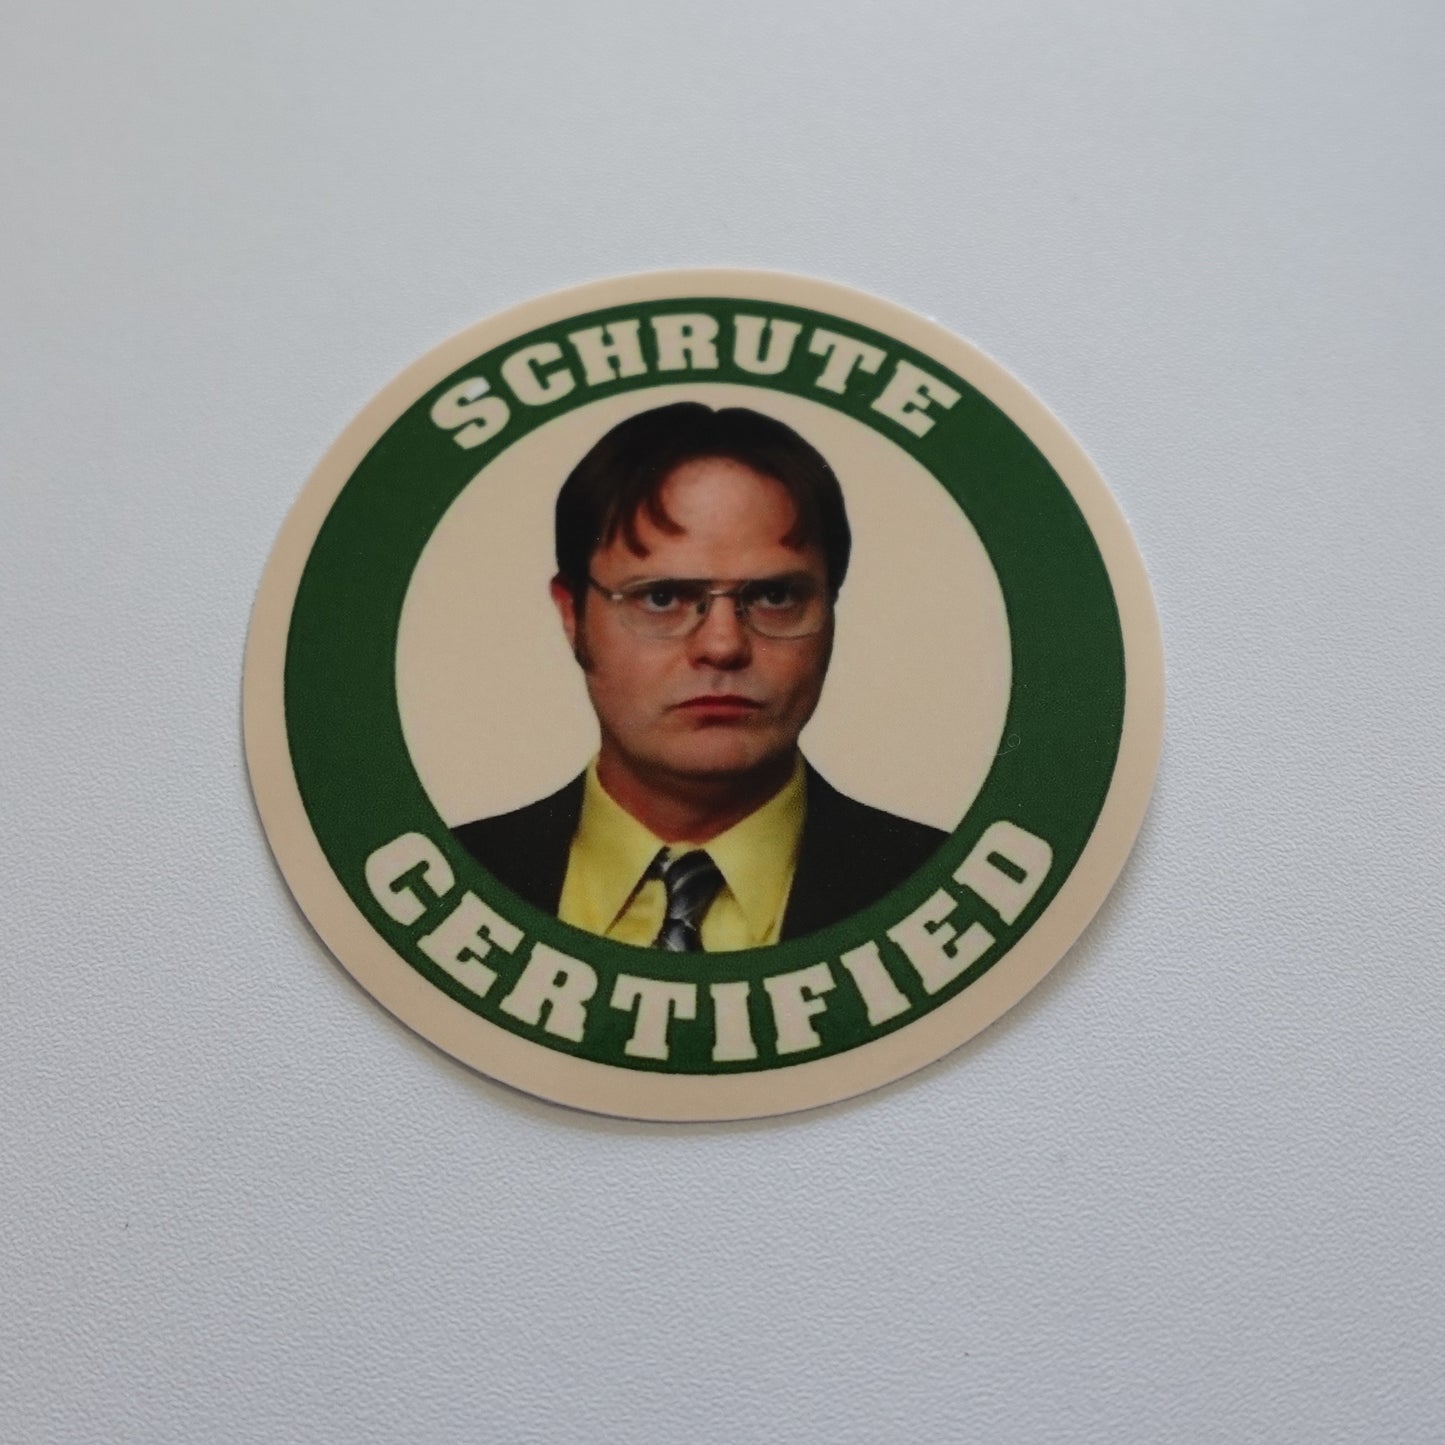 The Office - Schrute Certified